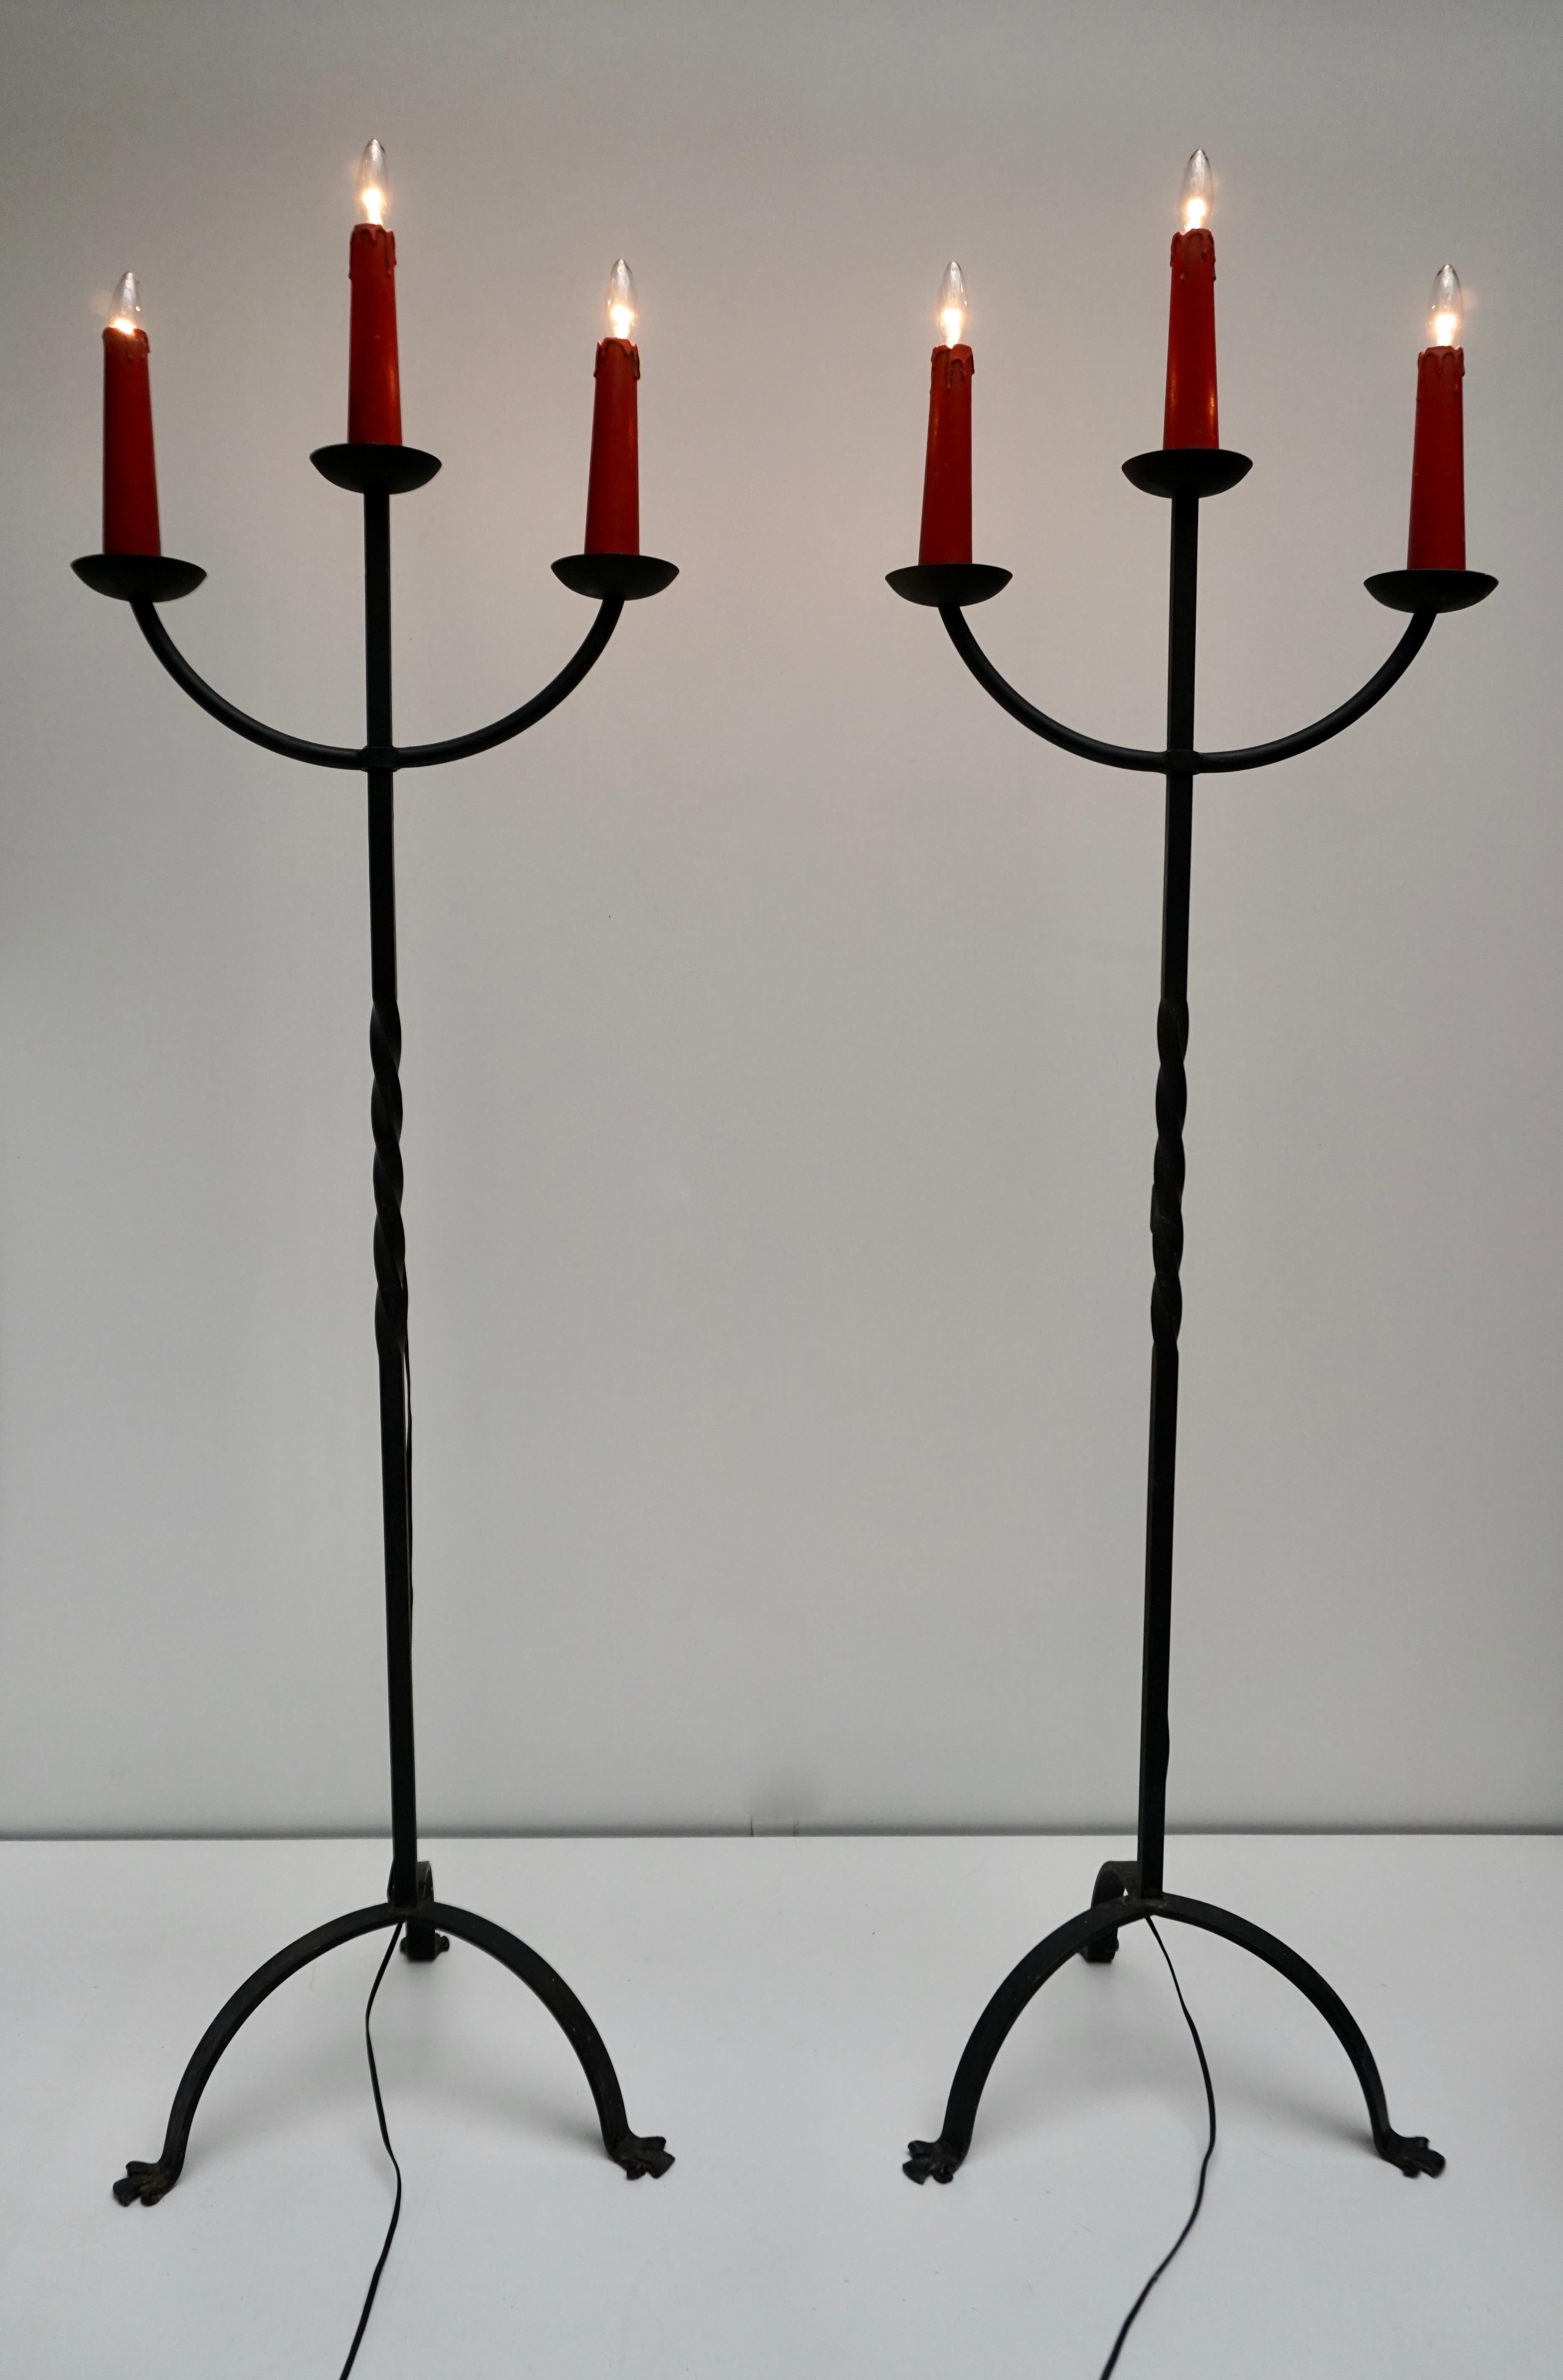 Direct from France.
Two gorgeous 3-light antique wrought iron floor lamp with candle holders, like an antique candelabra fresh out of a French country home or chapel! Three deep metal cups each hold a faux wax candlestick over the wired sockets.